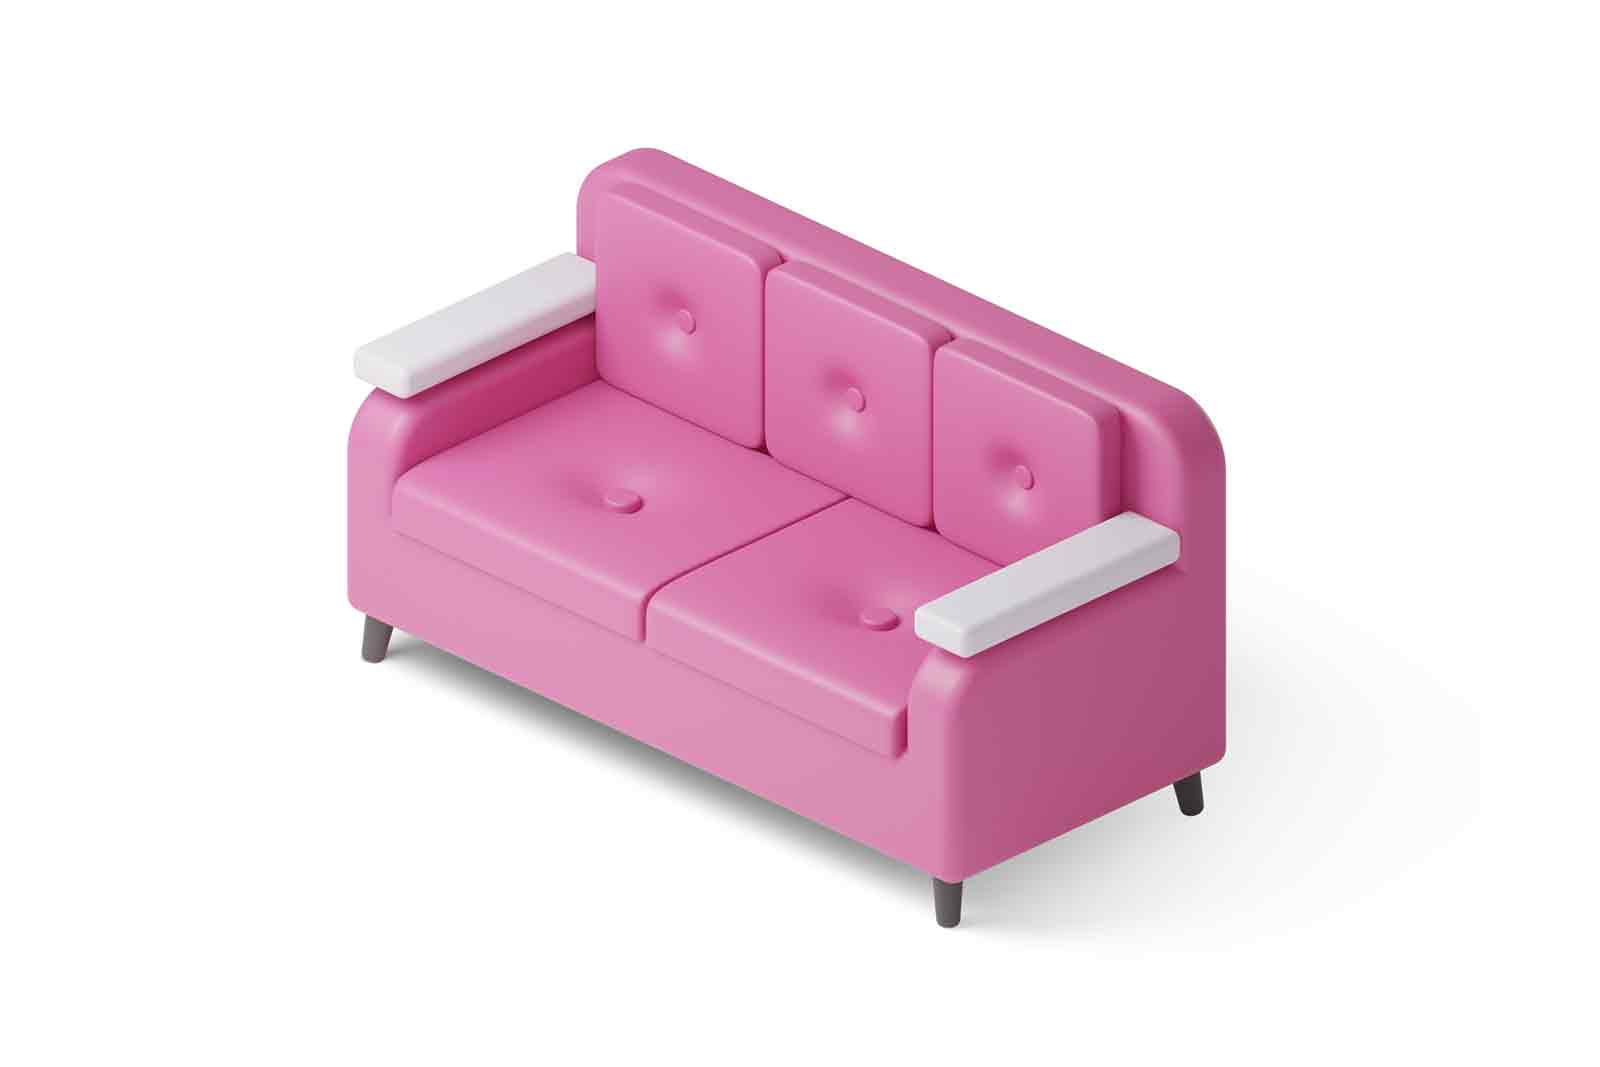 Modern pink leather sofa 3d illustration. Couch with pillows in simple modern style for interior design, living room, reception or lounge